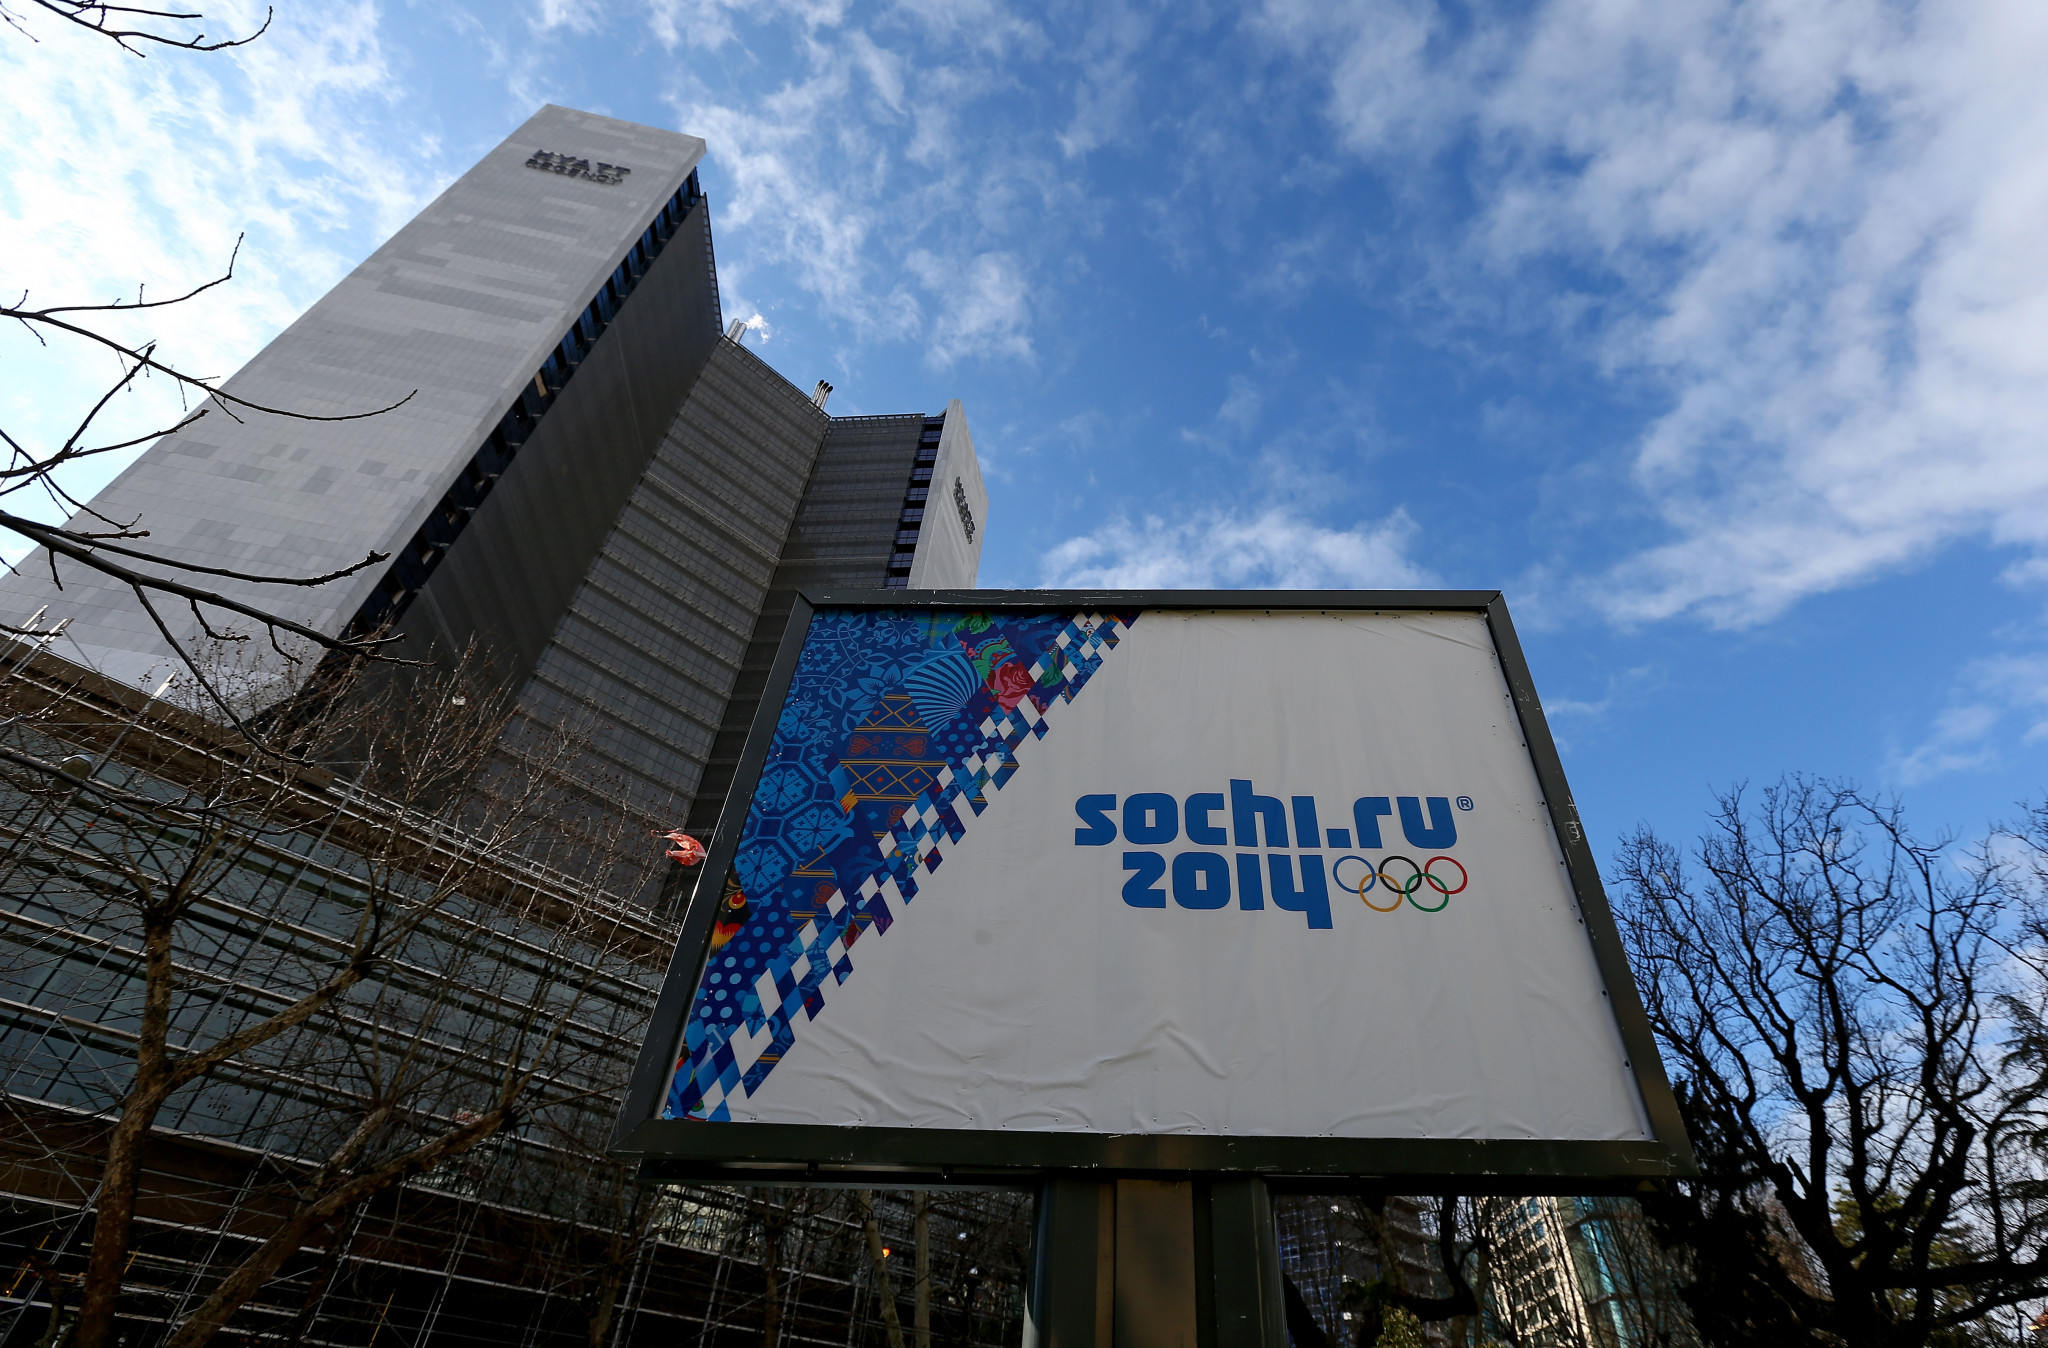 Hyatt suspends operations at Sochi hotel in Olympic city following invasion of Ukraine